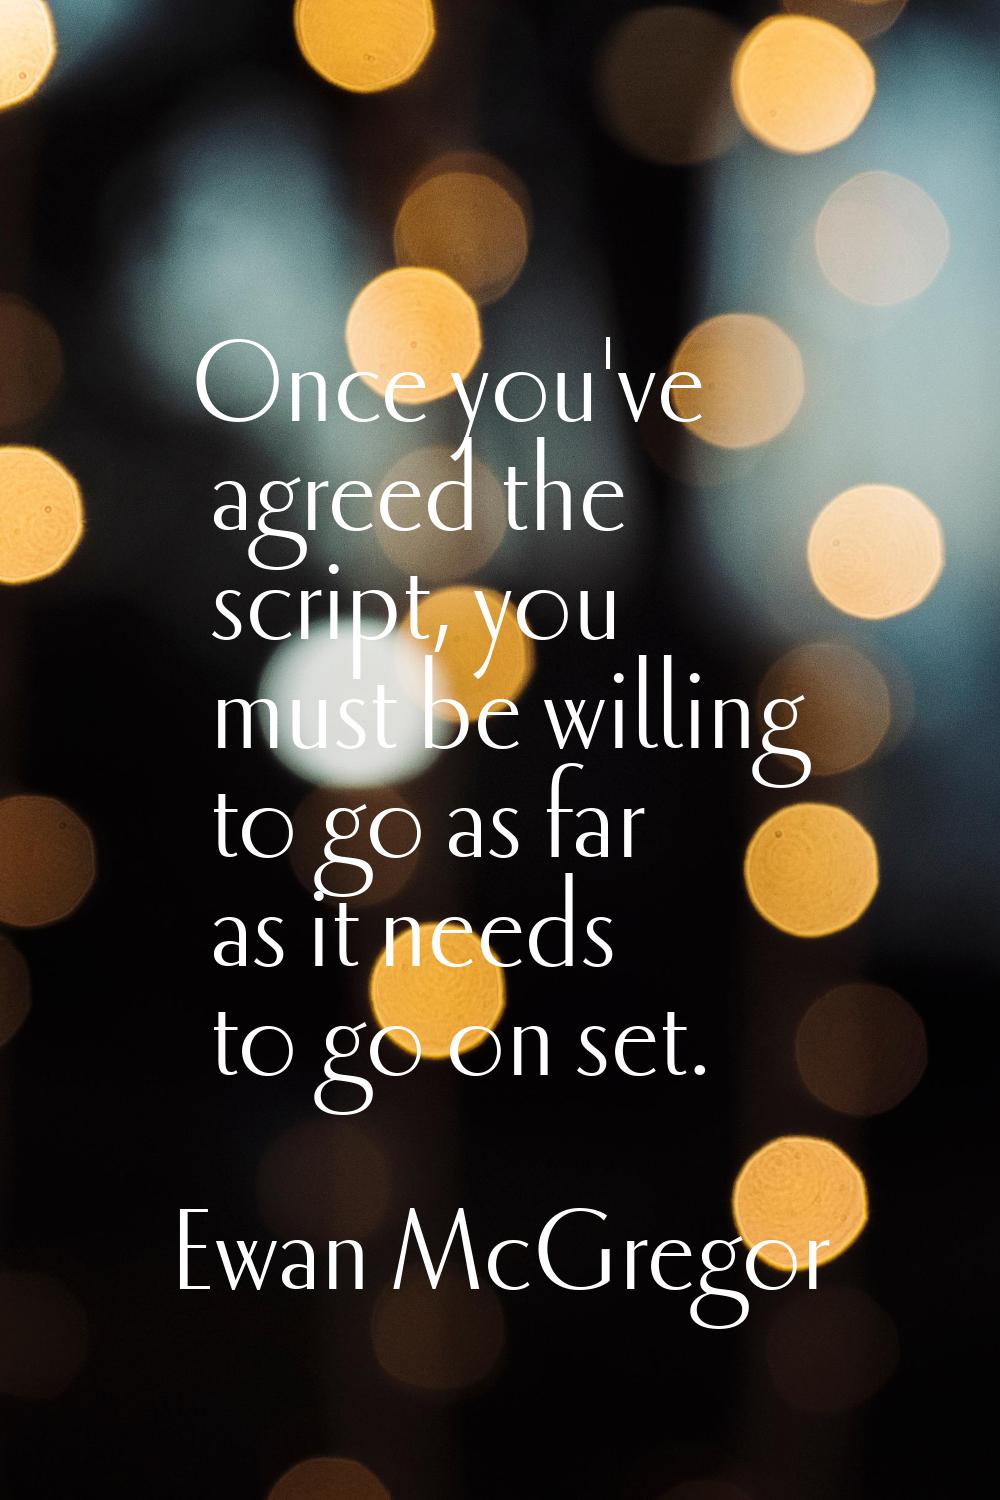 Once you've agreed the script, you must be willing to go as far as it needs to go on set.